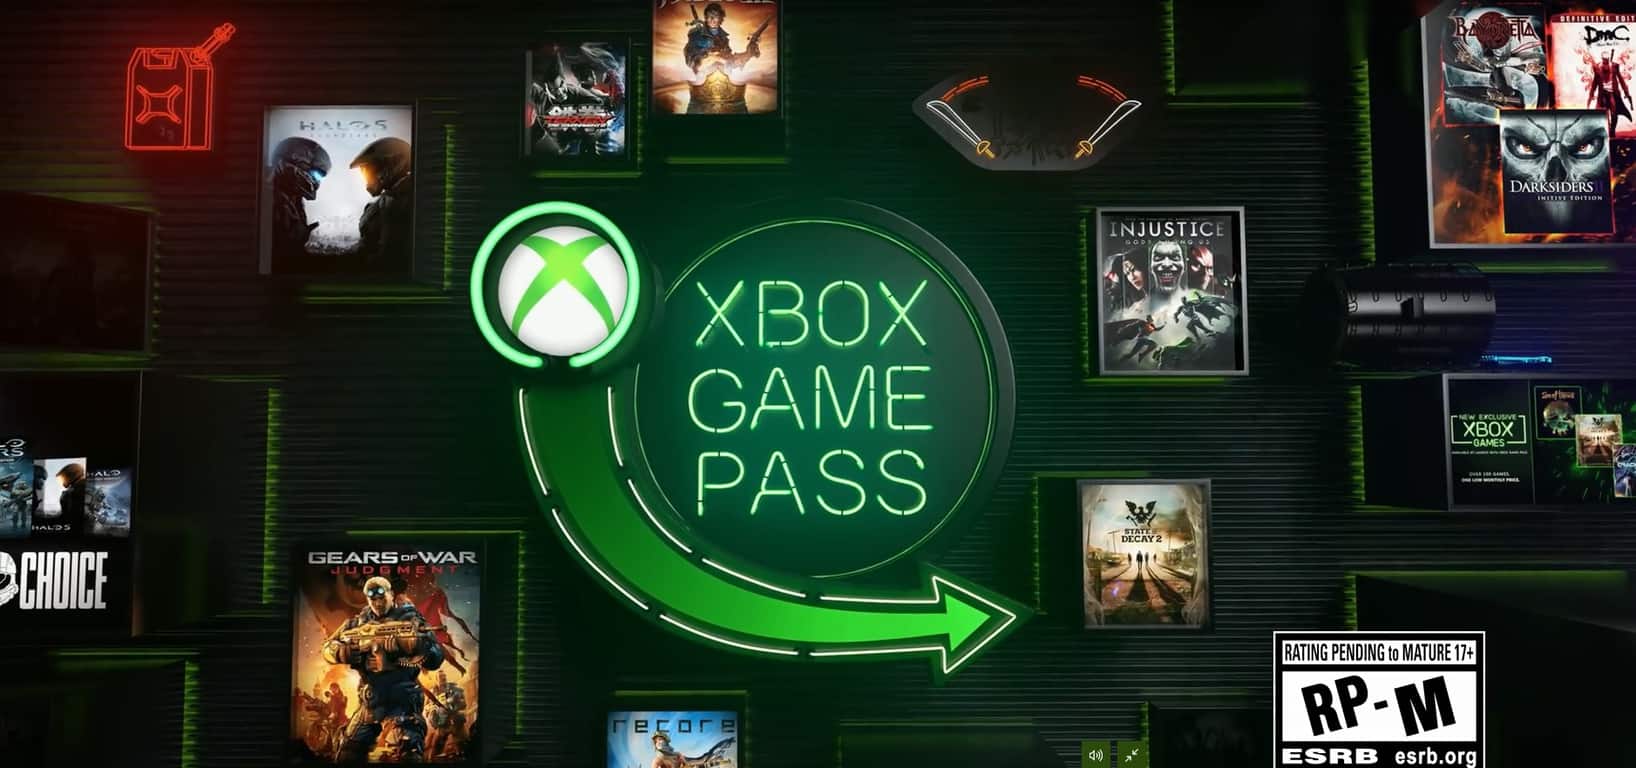 deals on game pass